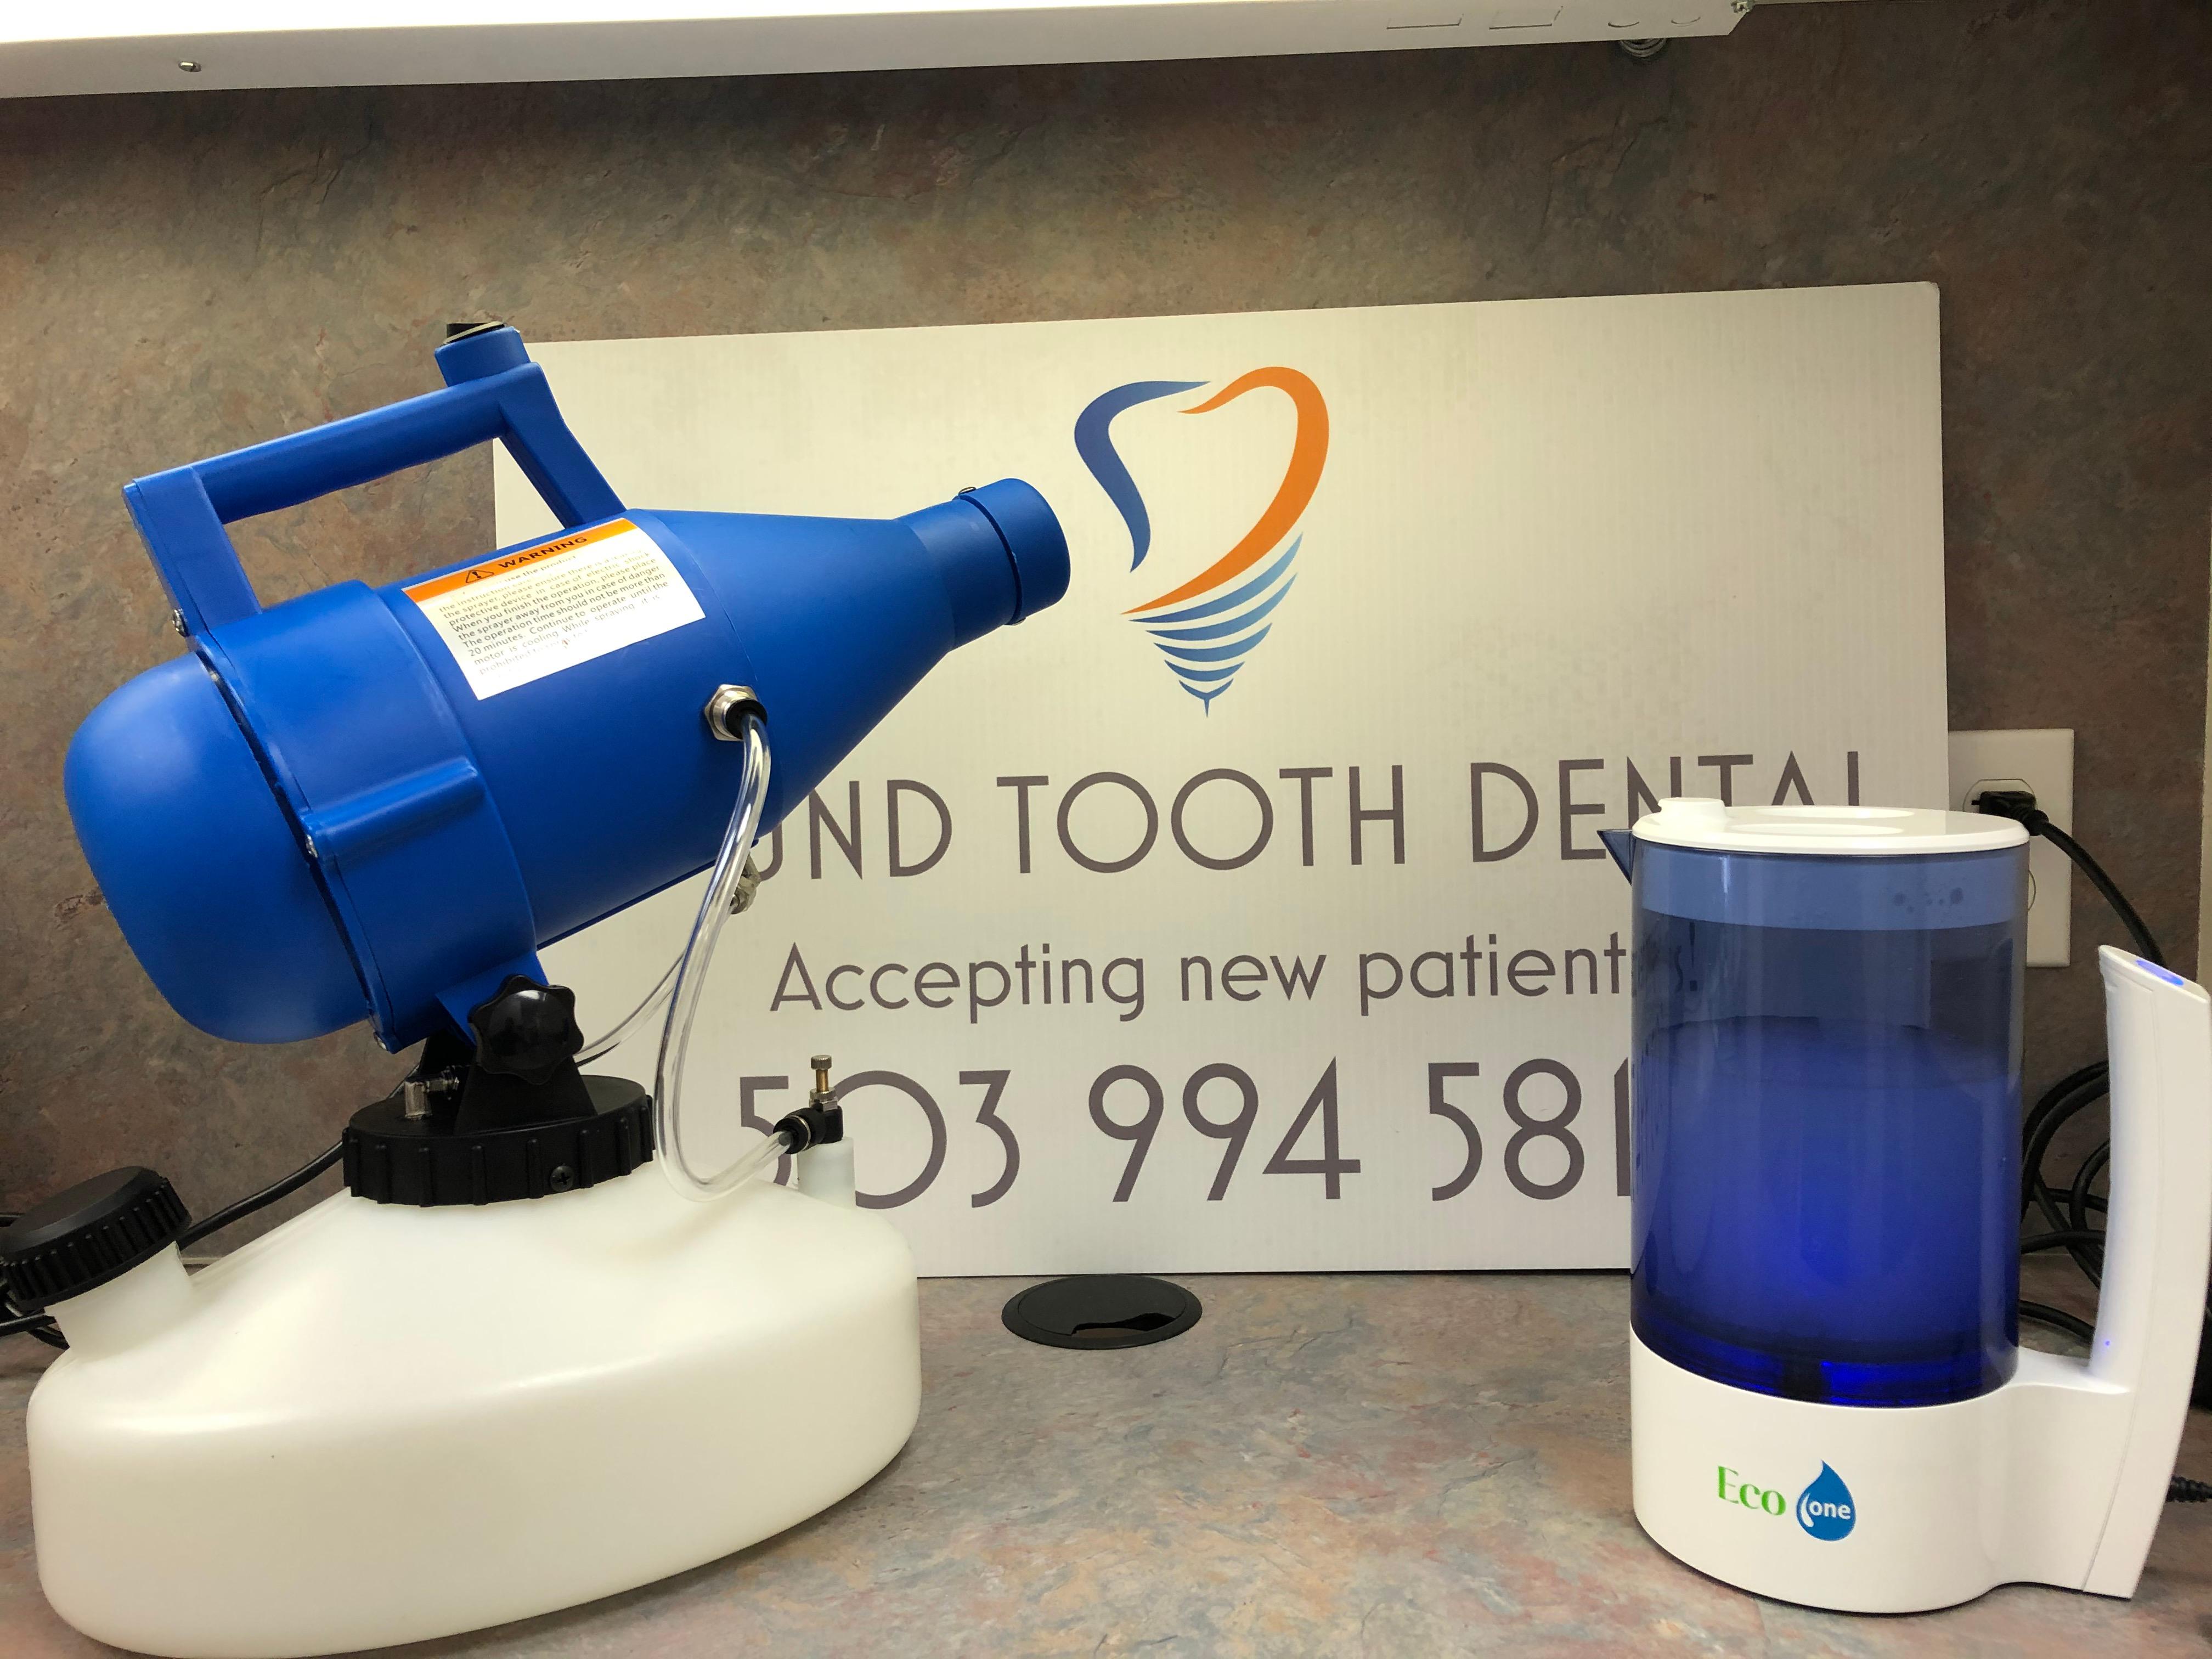 We care about your oral health as much as your overall health. This are powerful tools used to generate and spray the disinfectant agent (hypochlorous acid) through our clinic.